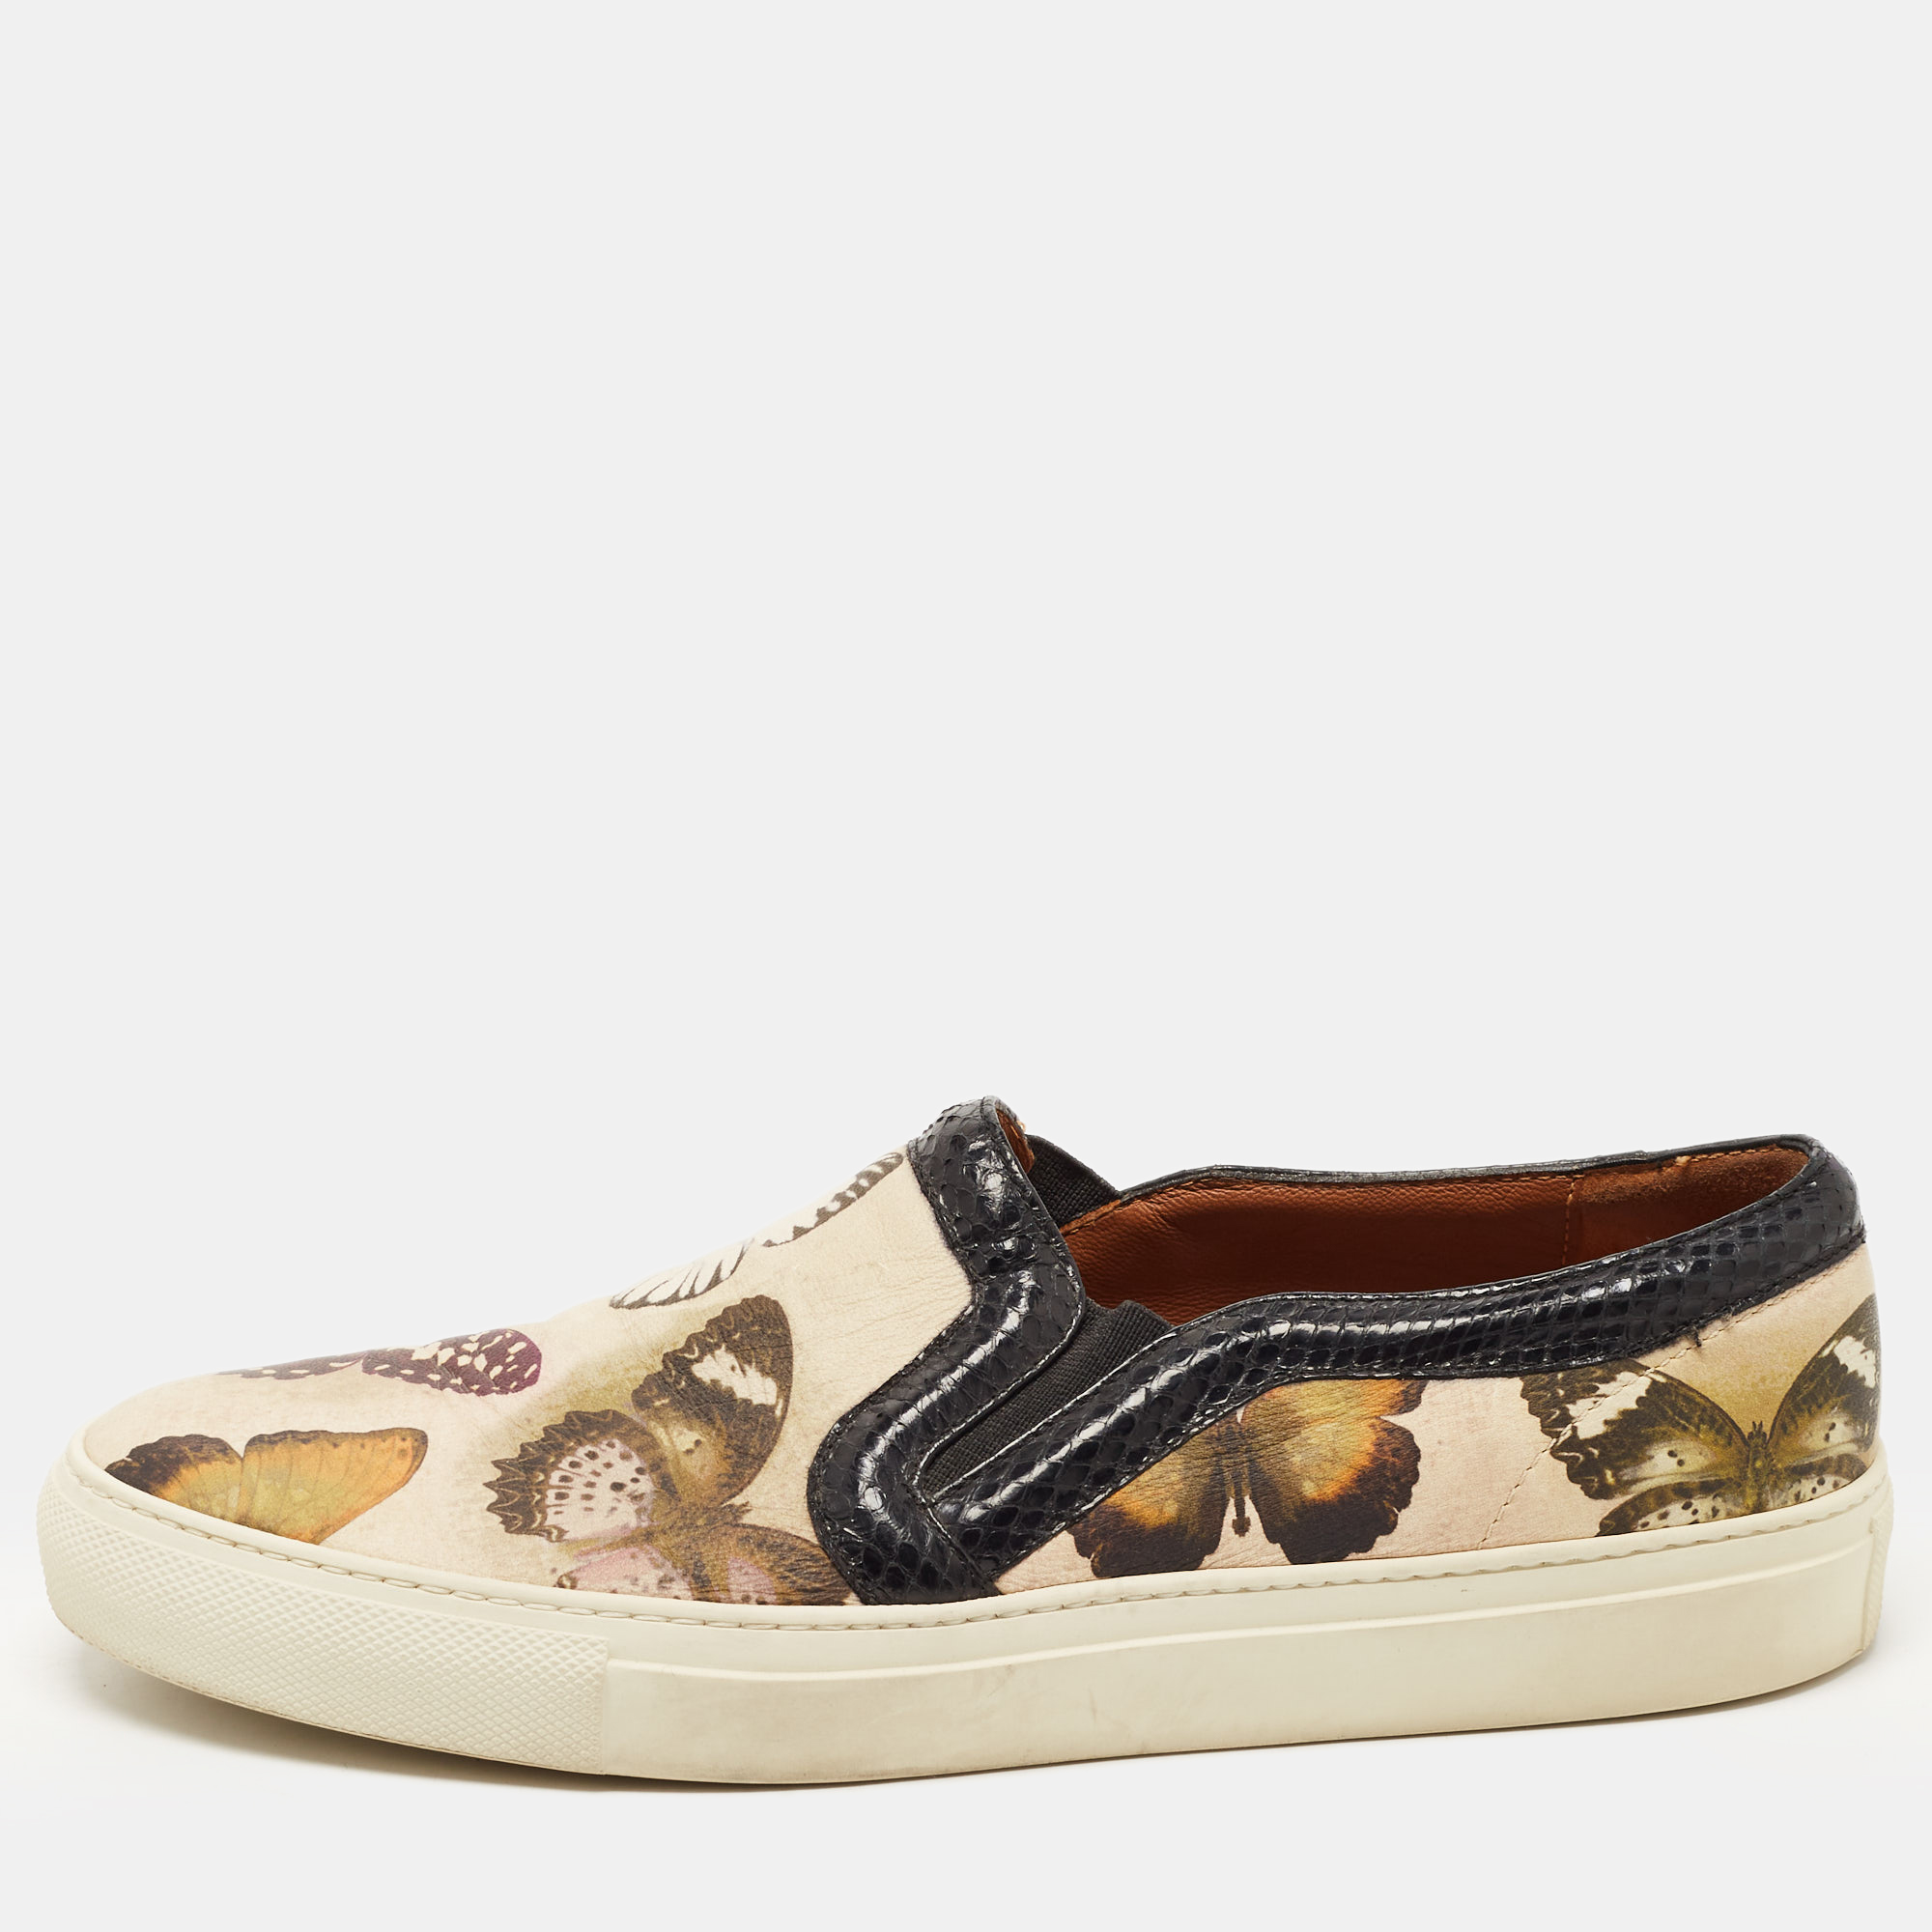 Pre-owned Givenchy Multicolor Butterfly Print Snakeskin Leather Slip On Sneakers Size 39.5